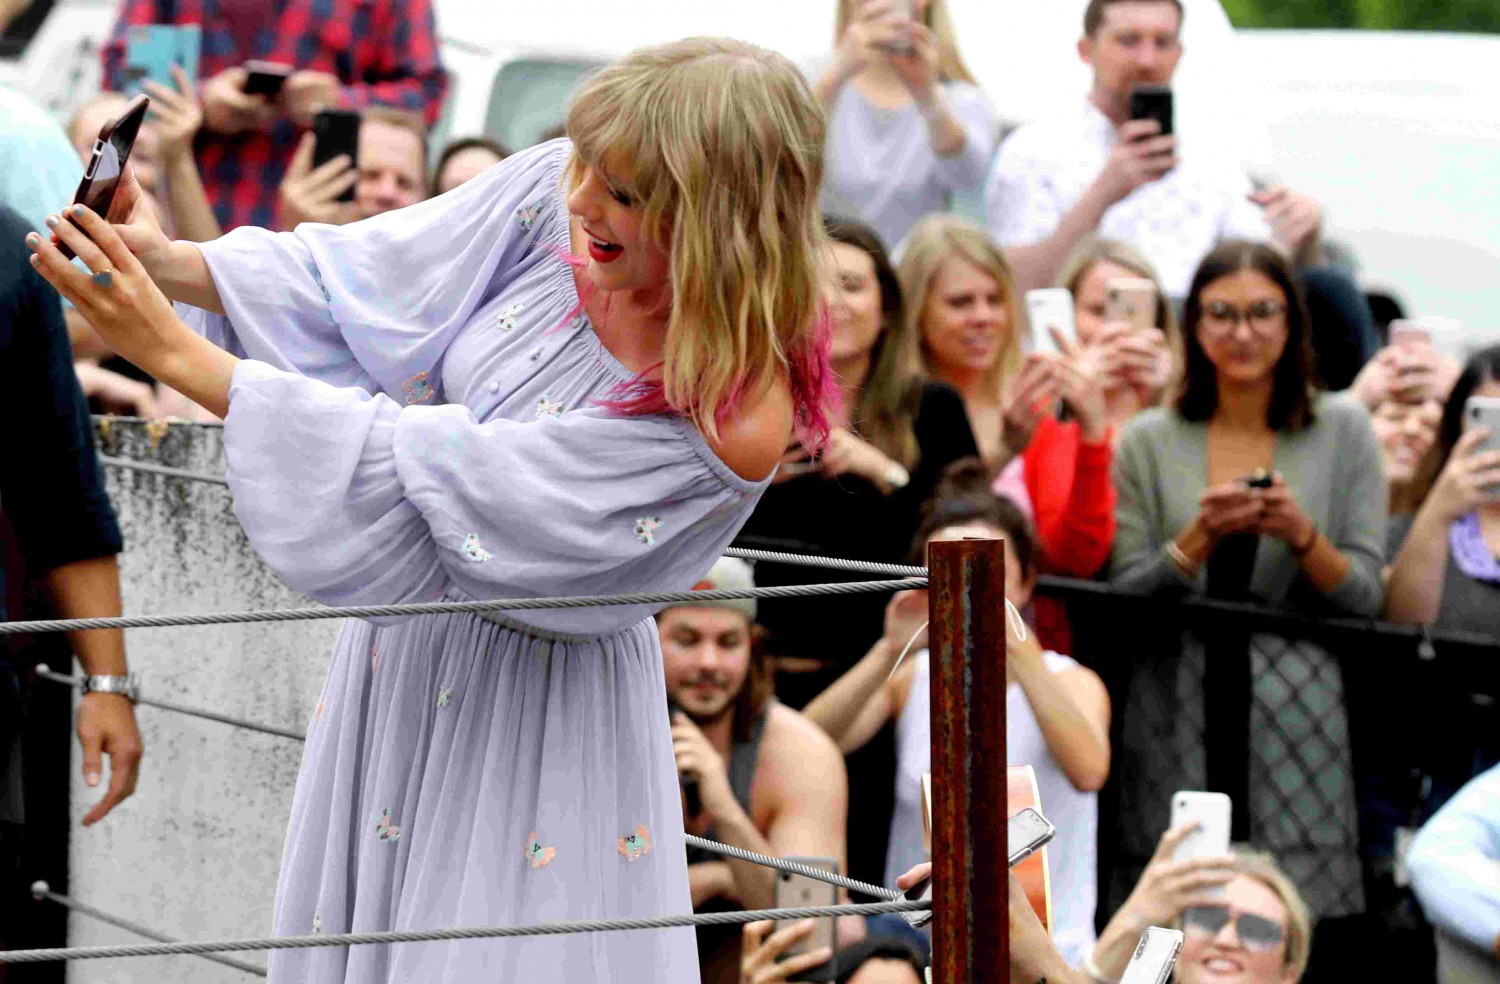 Taylor Swift makes a surprise appearance at her Nashville mural